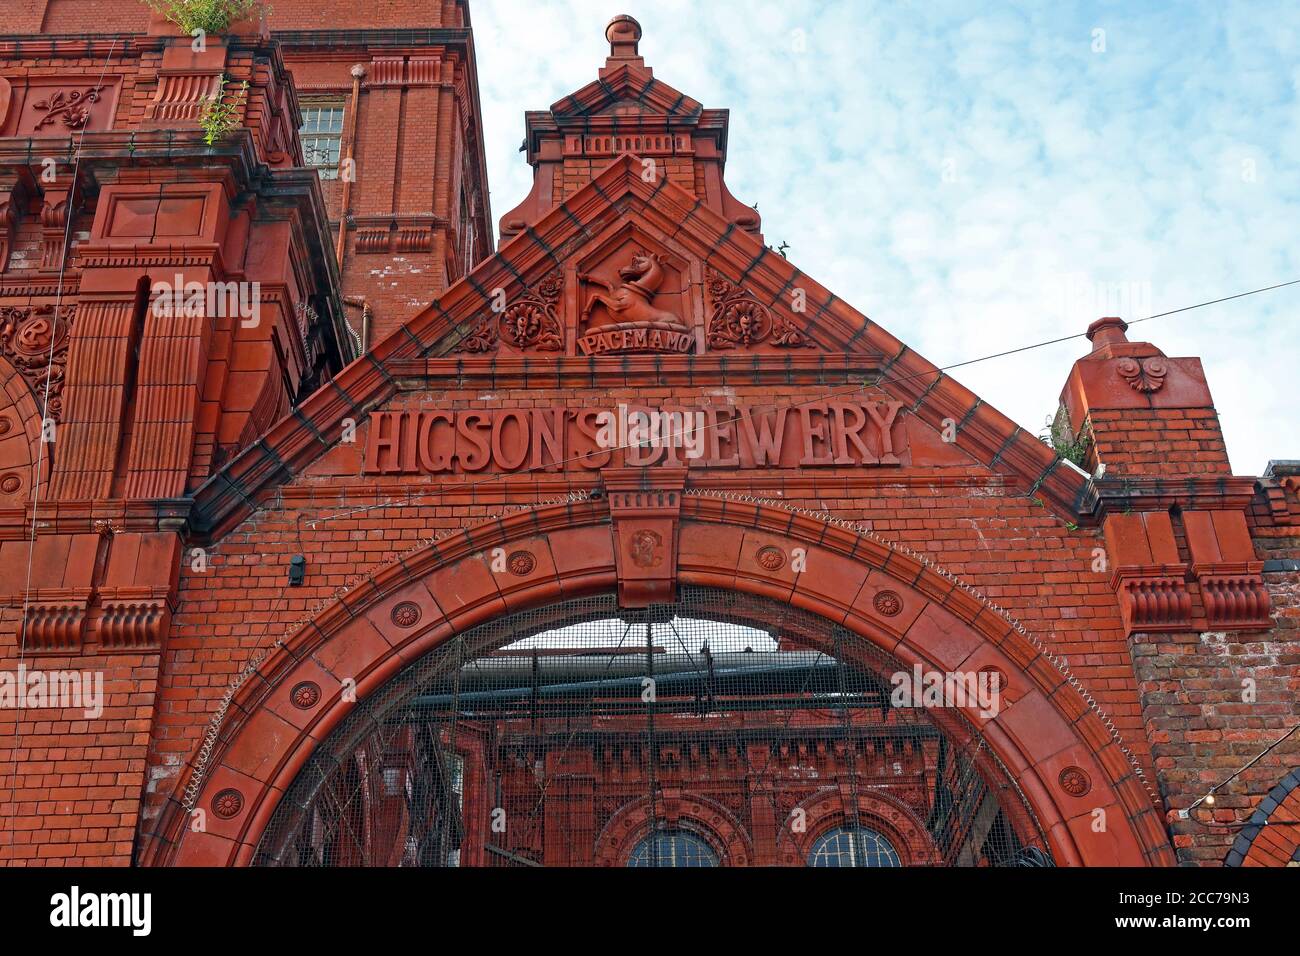 Higsons, brasserie Cains, 39 Stanhope St, Liverpool, Merseyside, Angleterre, Royaume-Uni, L8 5RE Banque D'Images